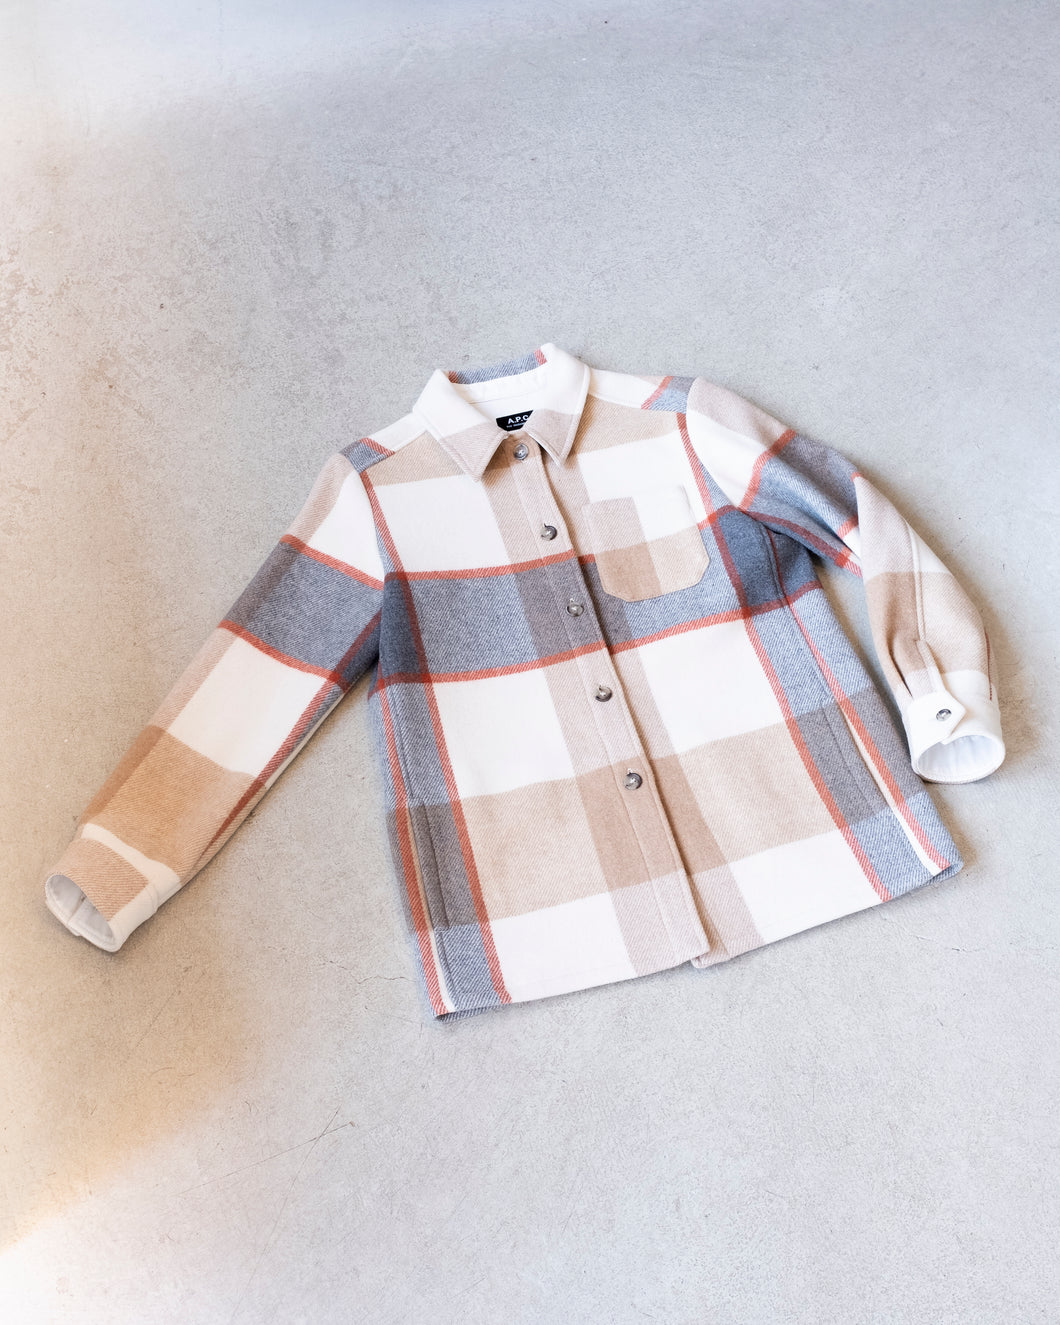 APC Darlene Shortcoat - flat front. This shortcoat features a beige, grey, white and red plaid pattern.